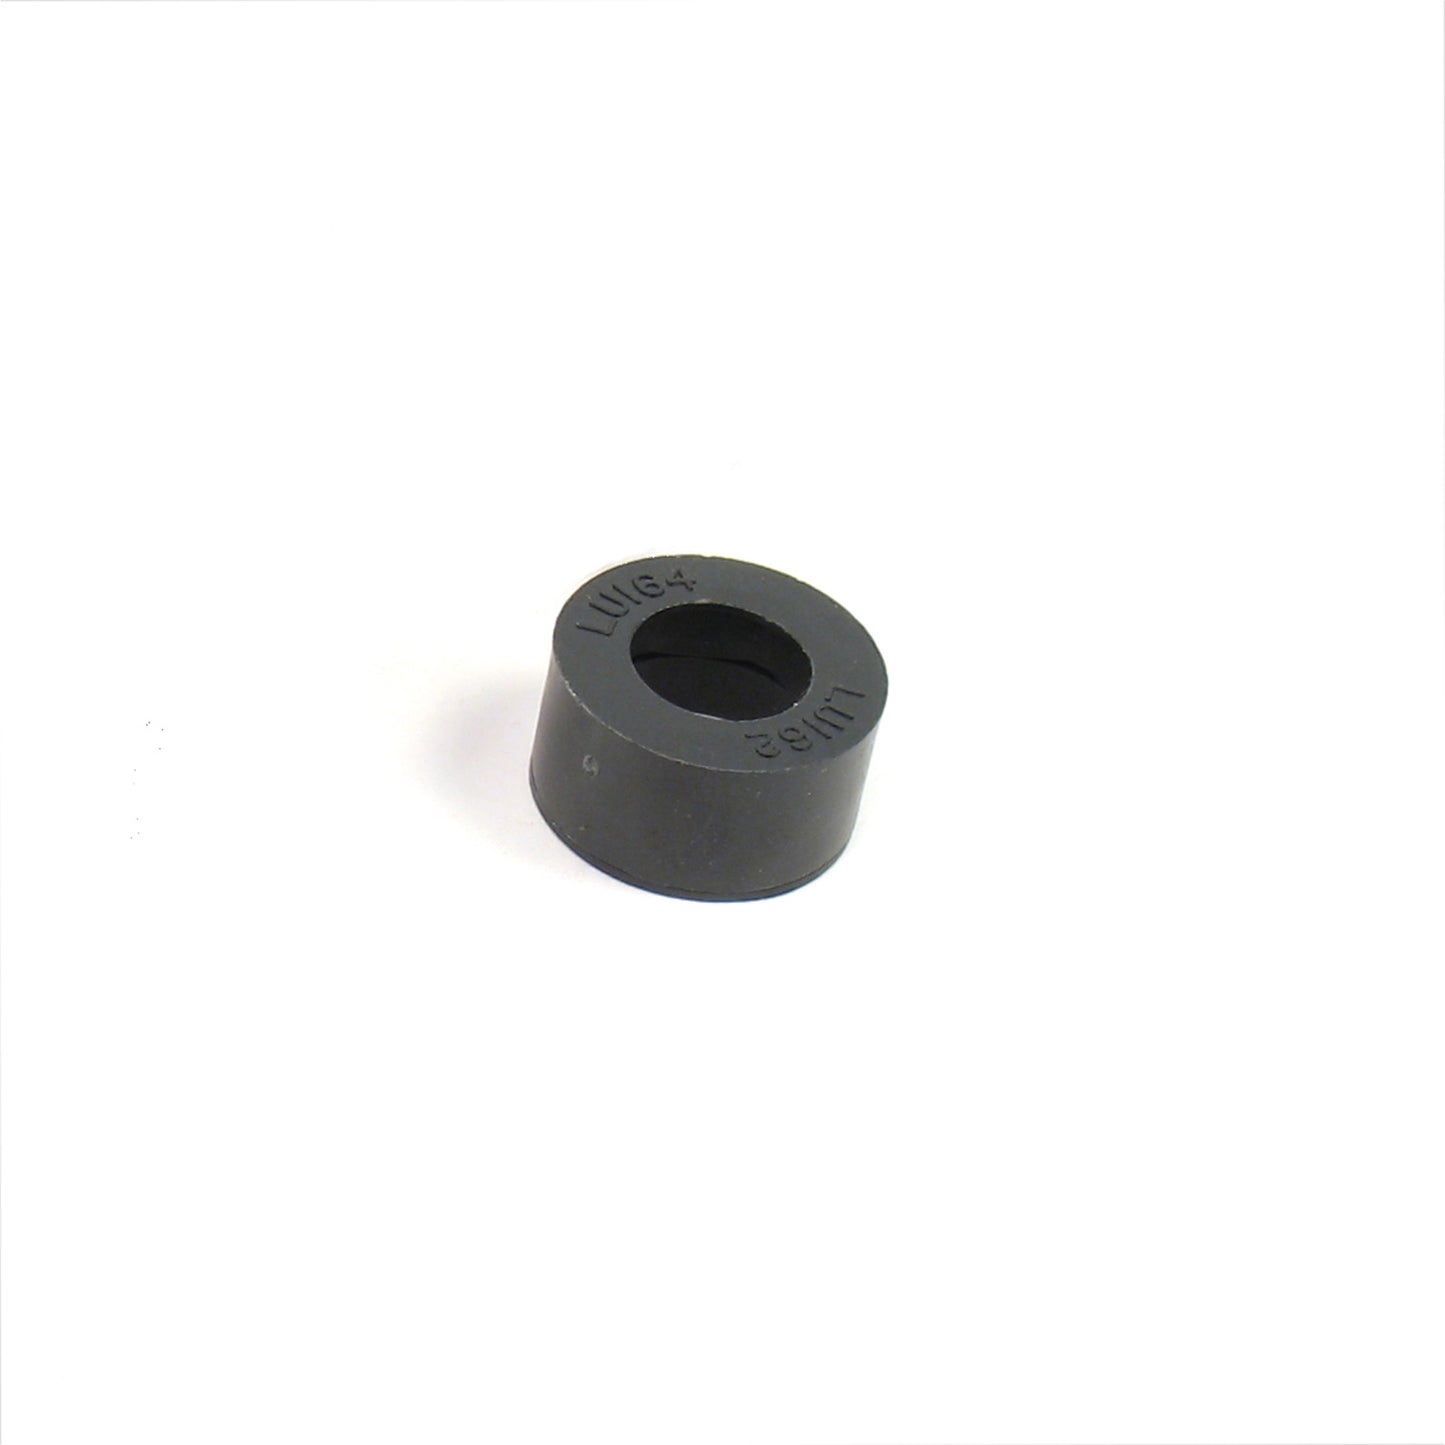 PerTronix LU-166A3 Magnet Sleeve (only) for LU-166A Ignitor Kit